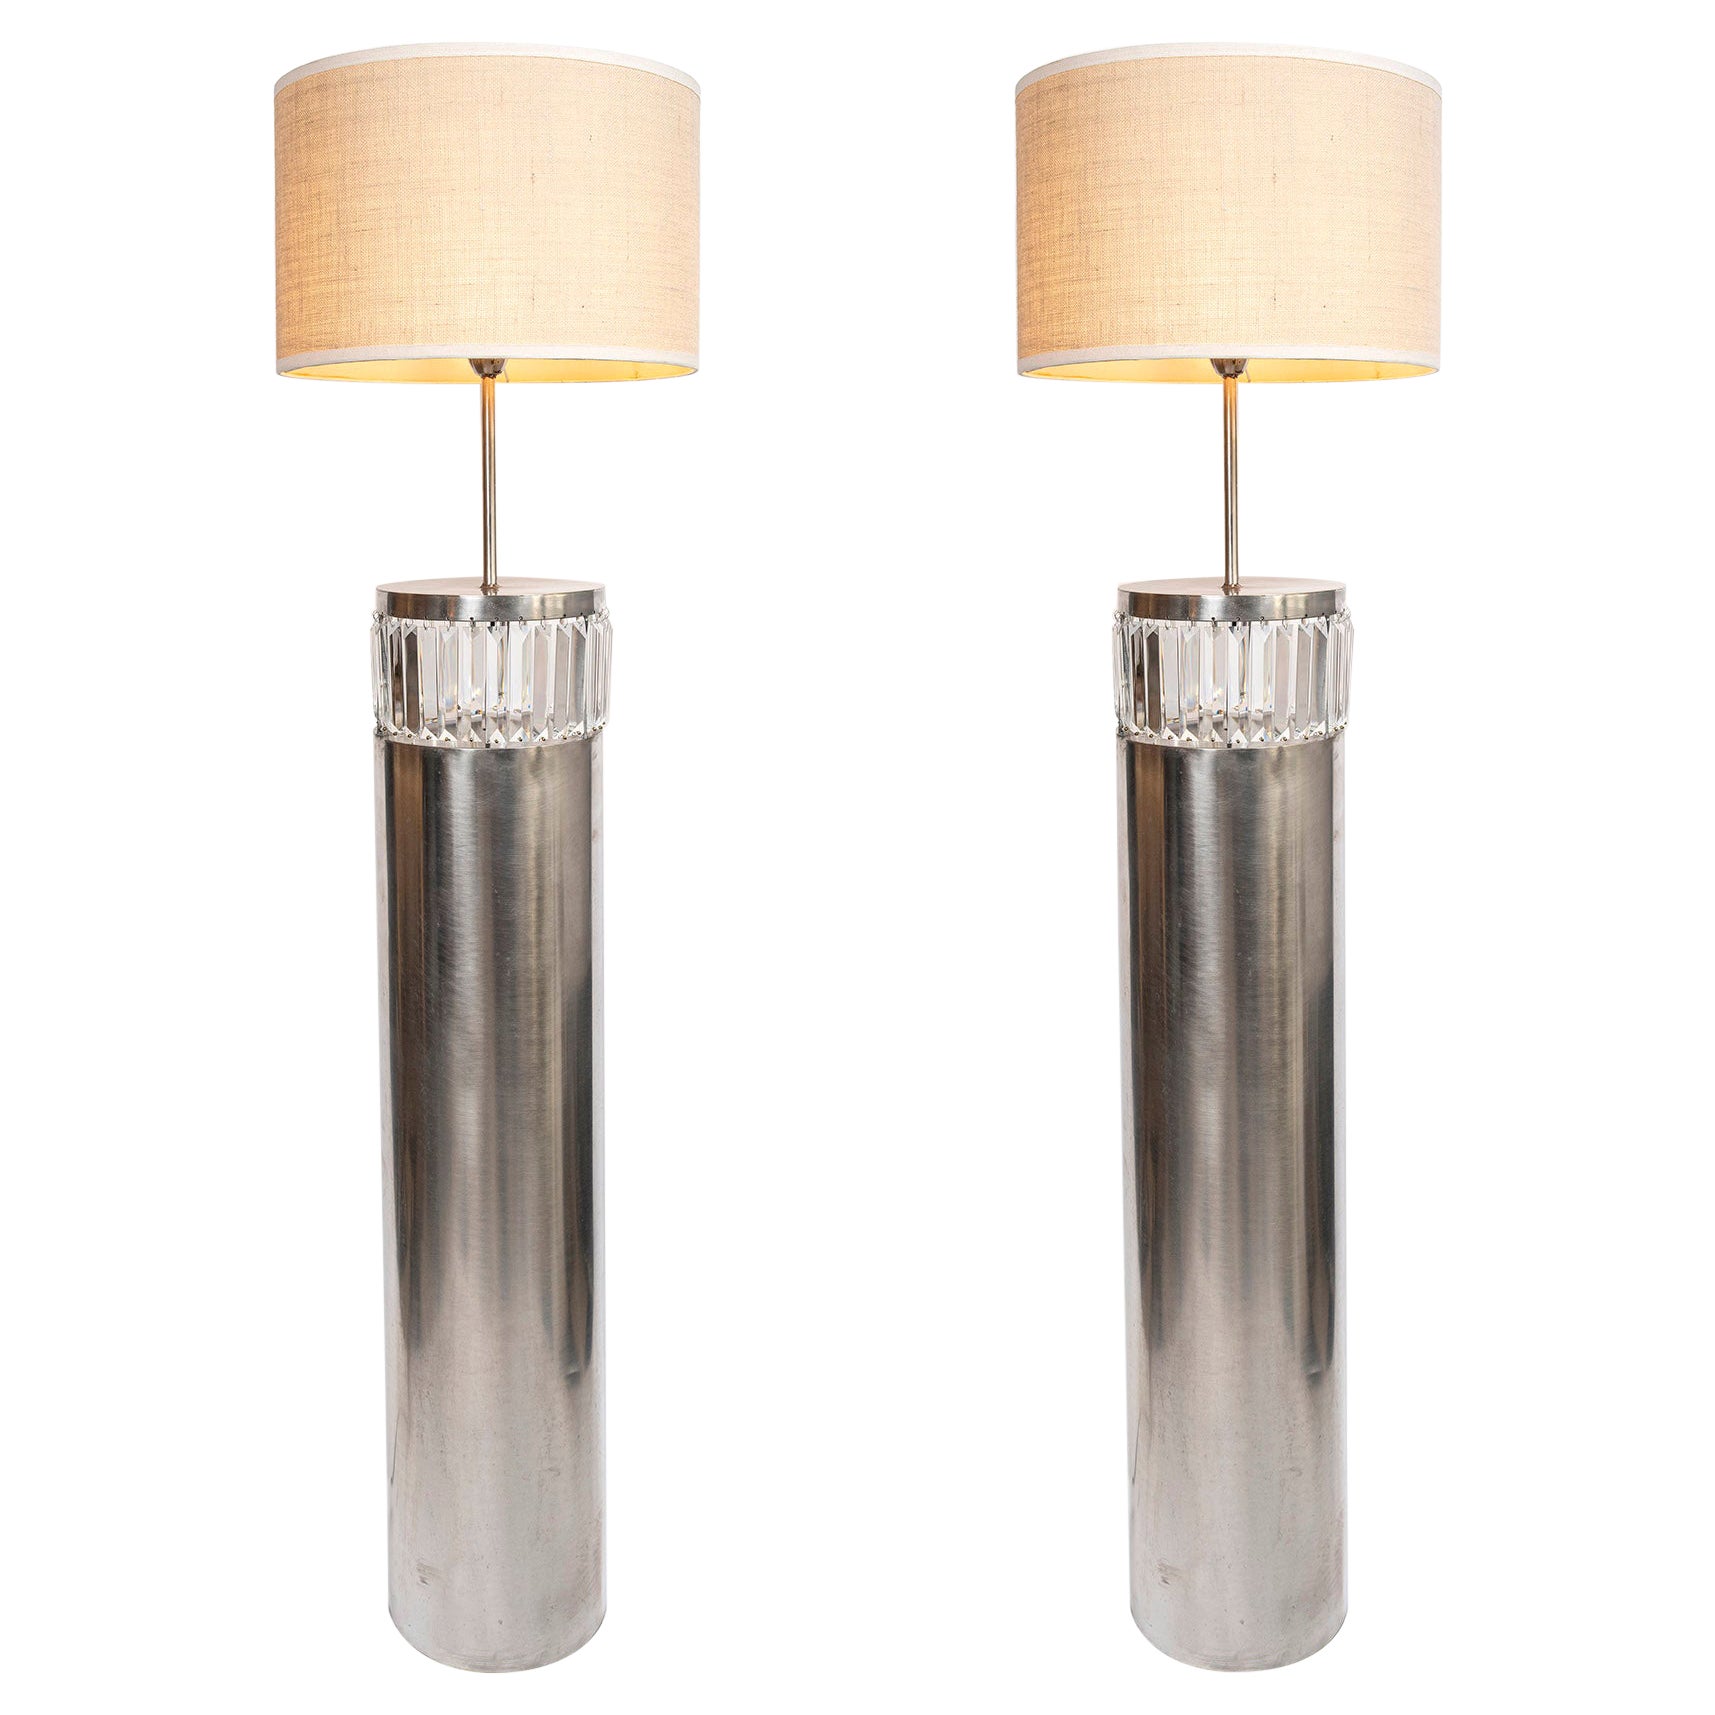 Pair of Chrome Iron and Crystal Floor Lamps, Argentina, 1990